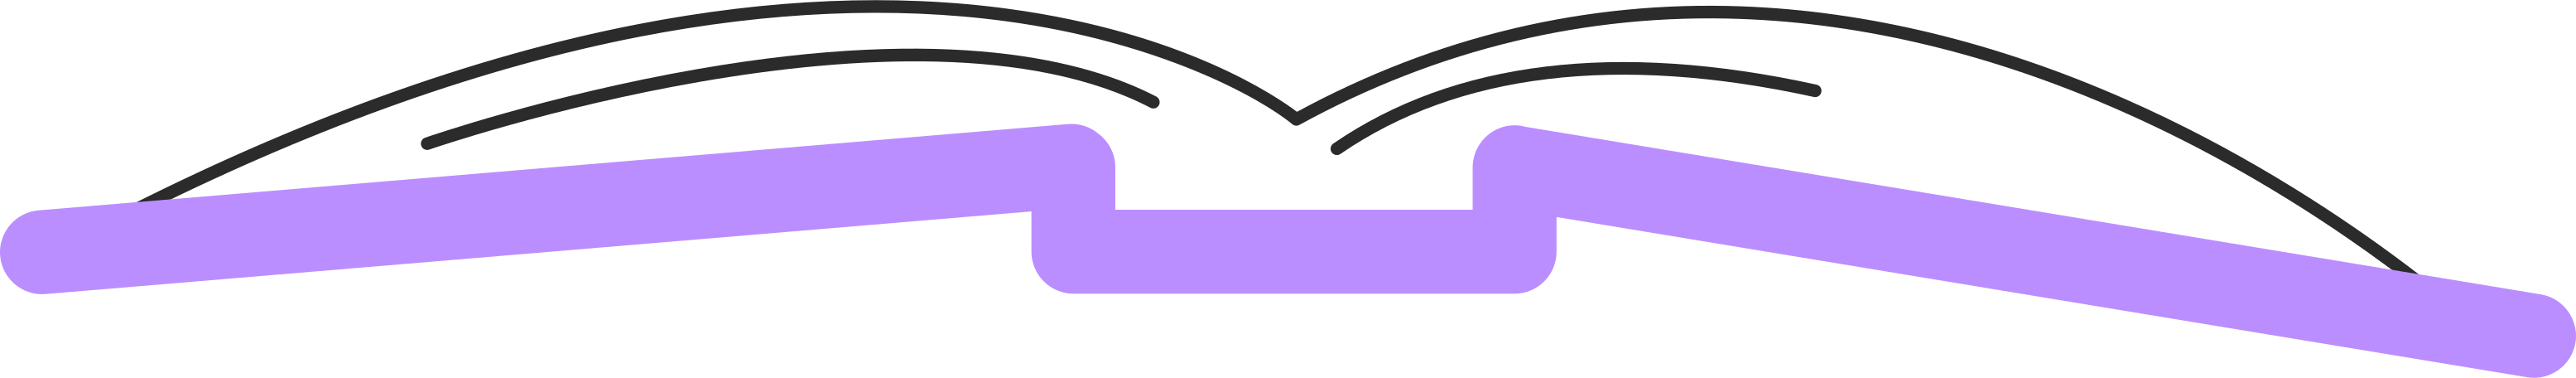 open lilac book Illustration in PNG, SVG